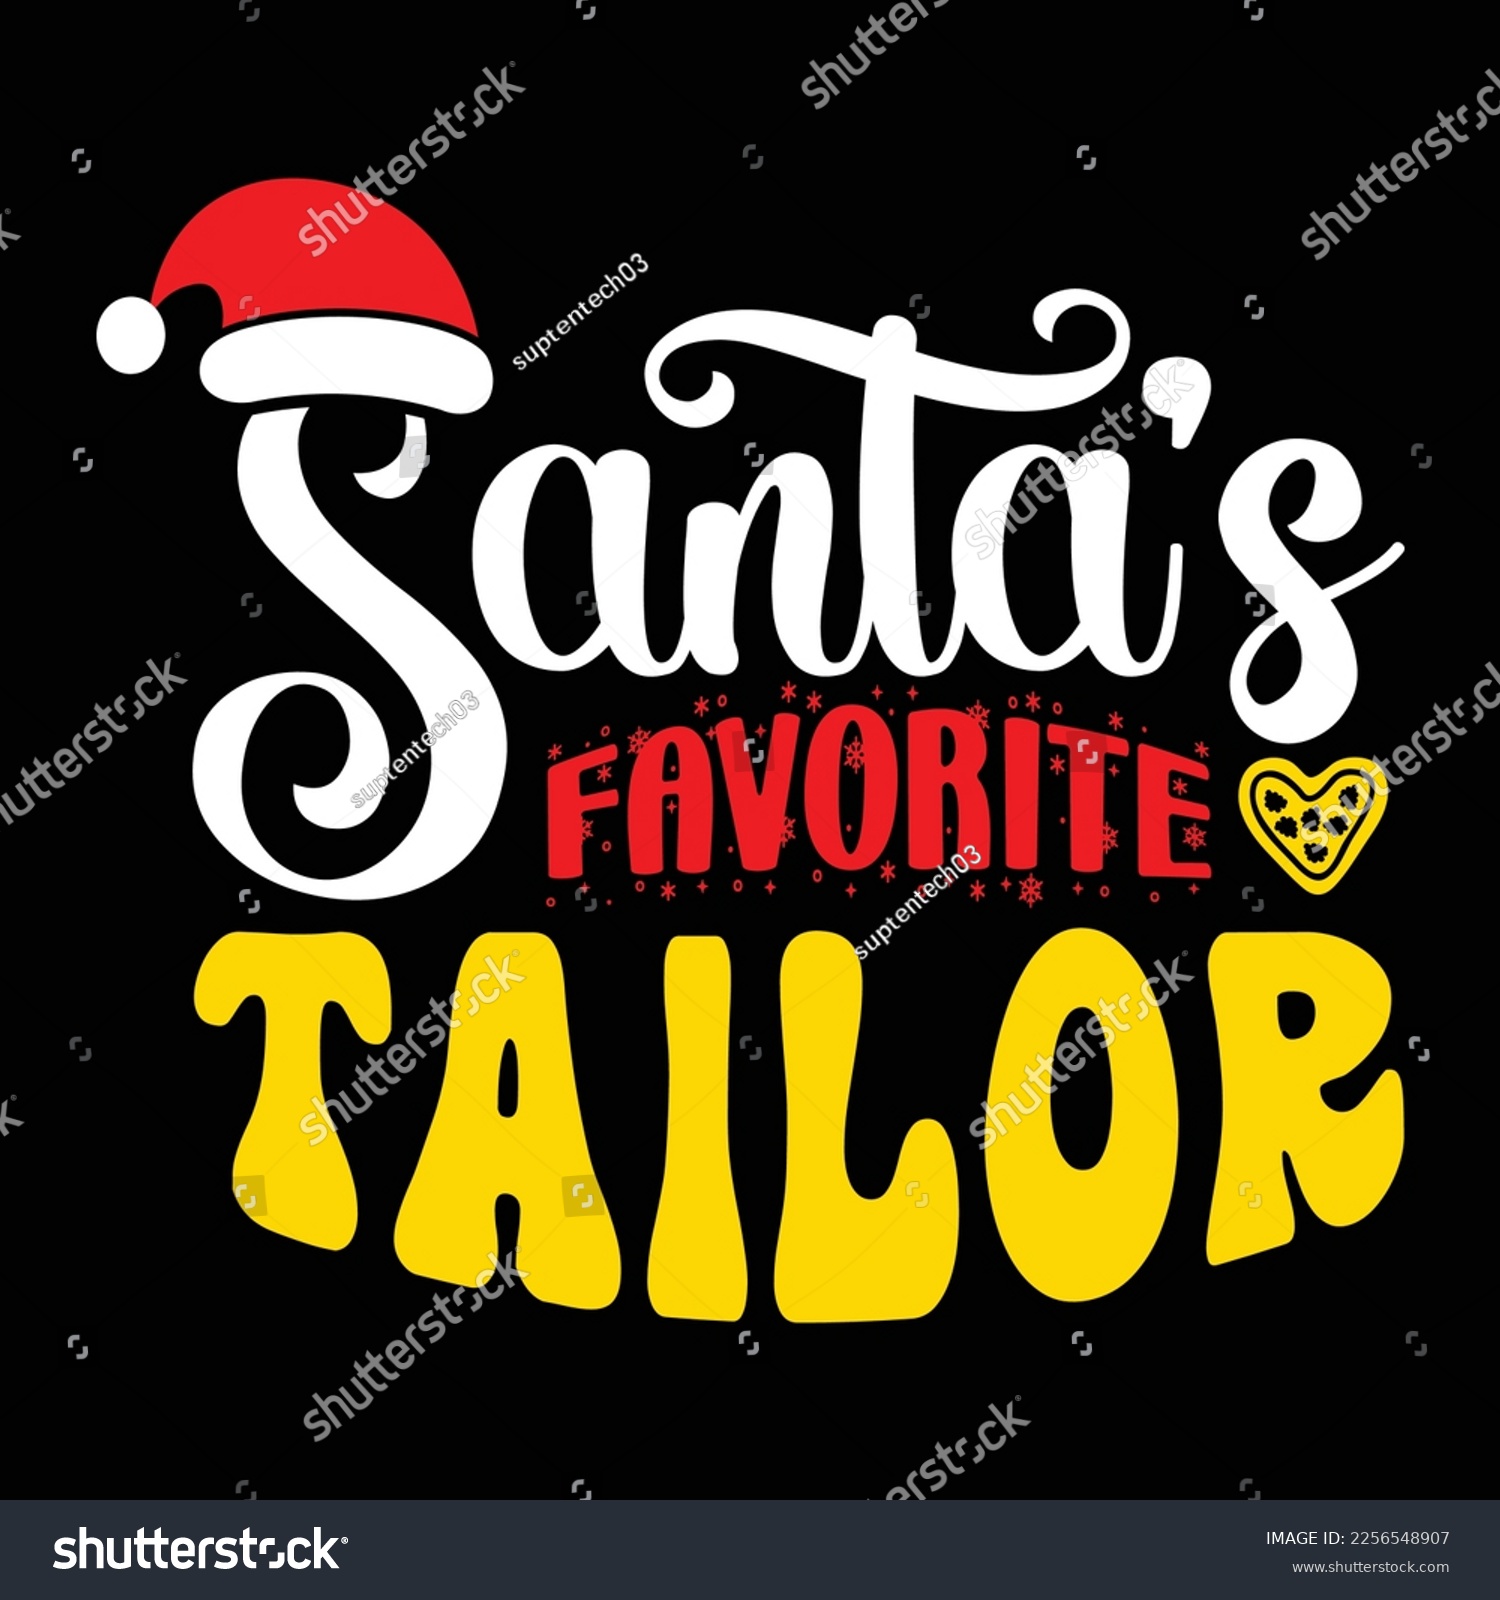 SVG of Santa's Favorite Tailor, Merry Christmas shirts Print Template, Xmas Ugly Snow Santa Clouse New Year Holiday Candy Santa Hat vector illustration for Christmas hand lettered svg